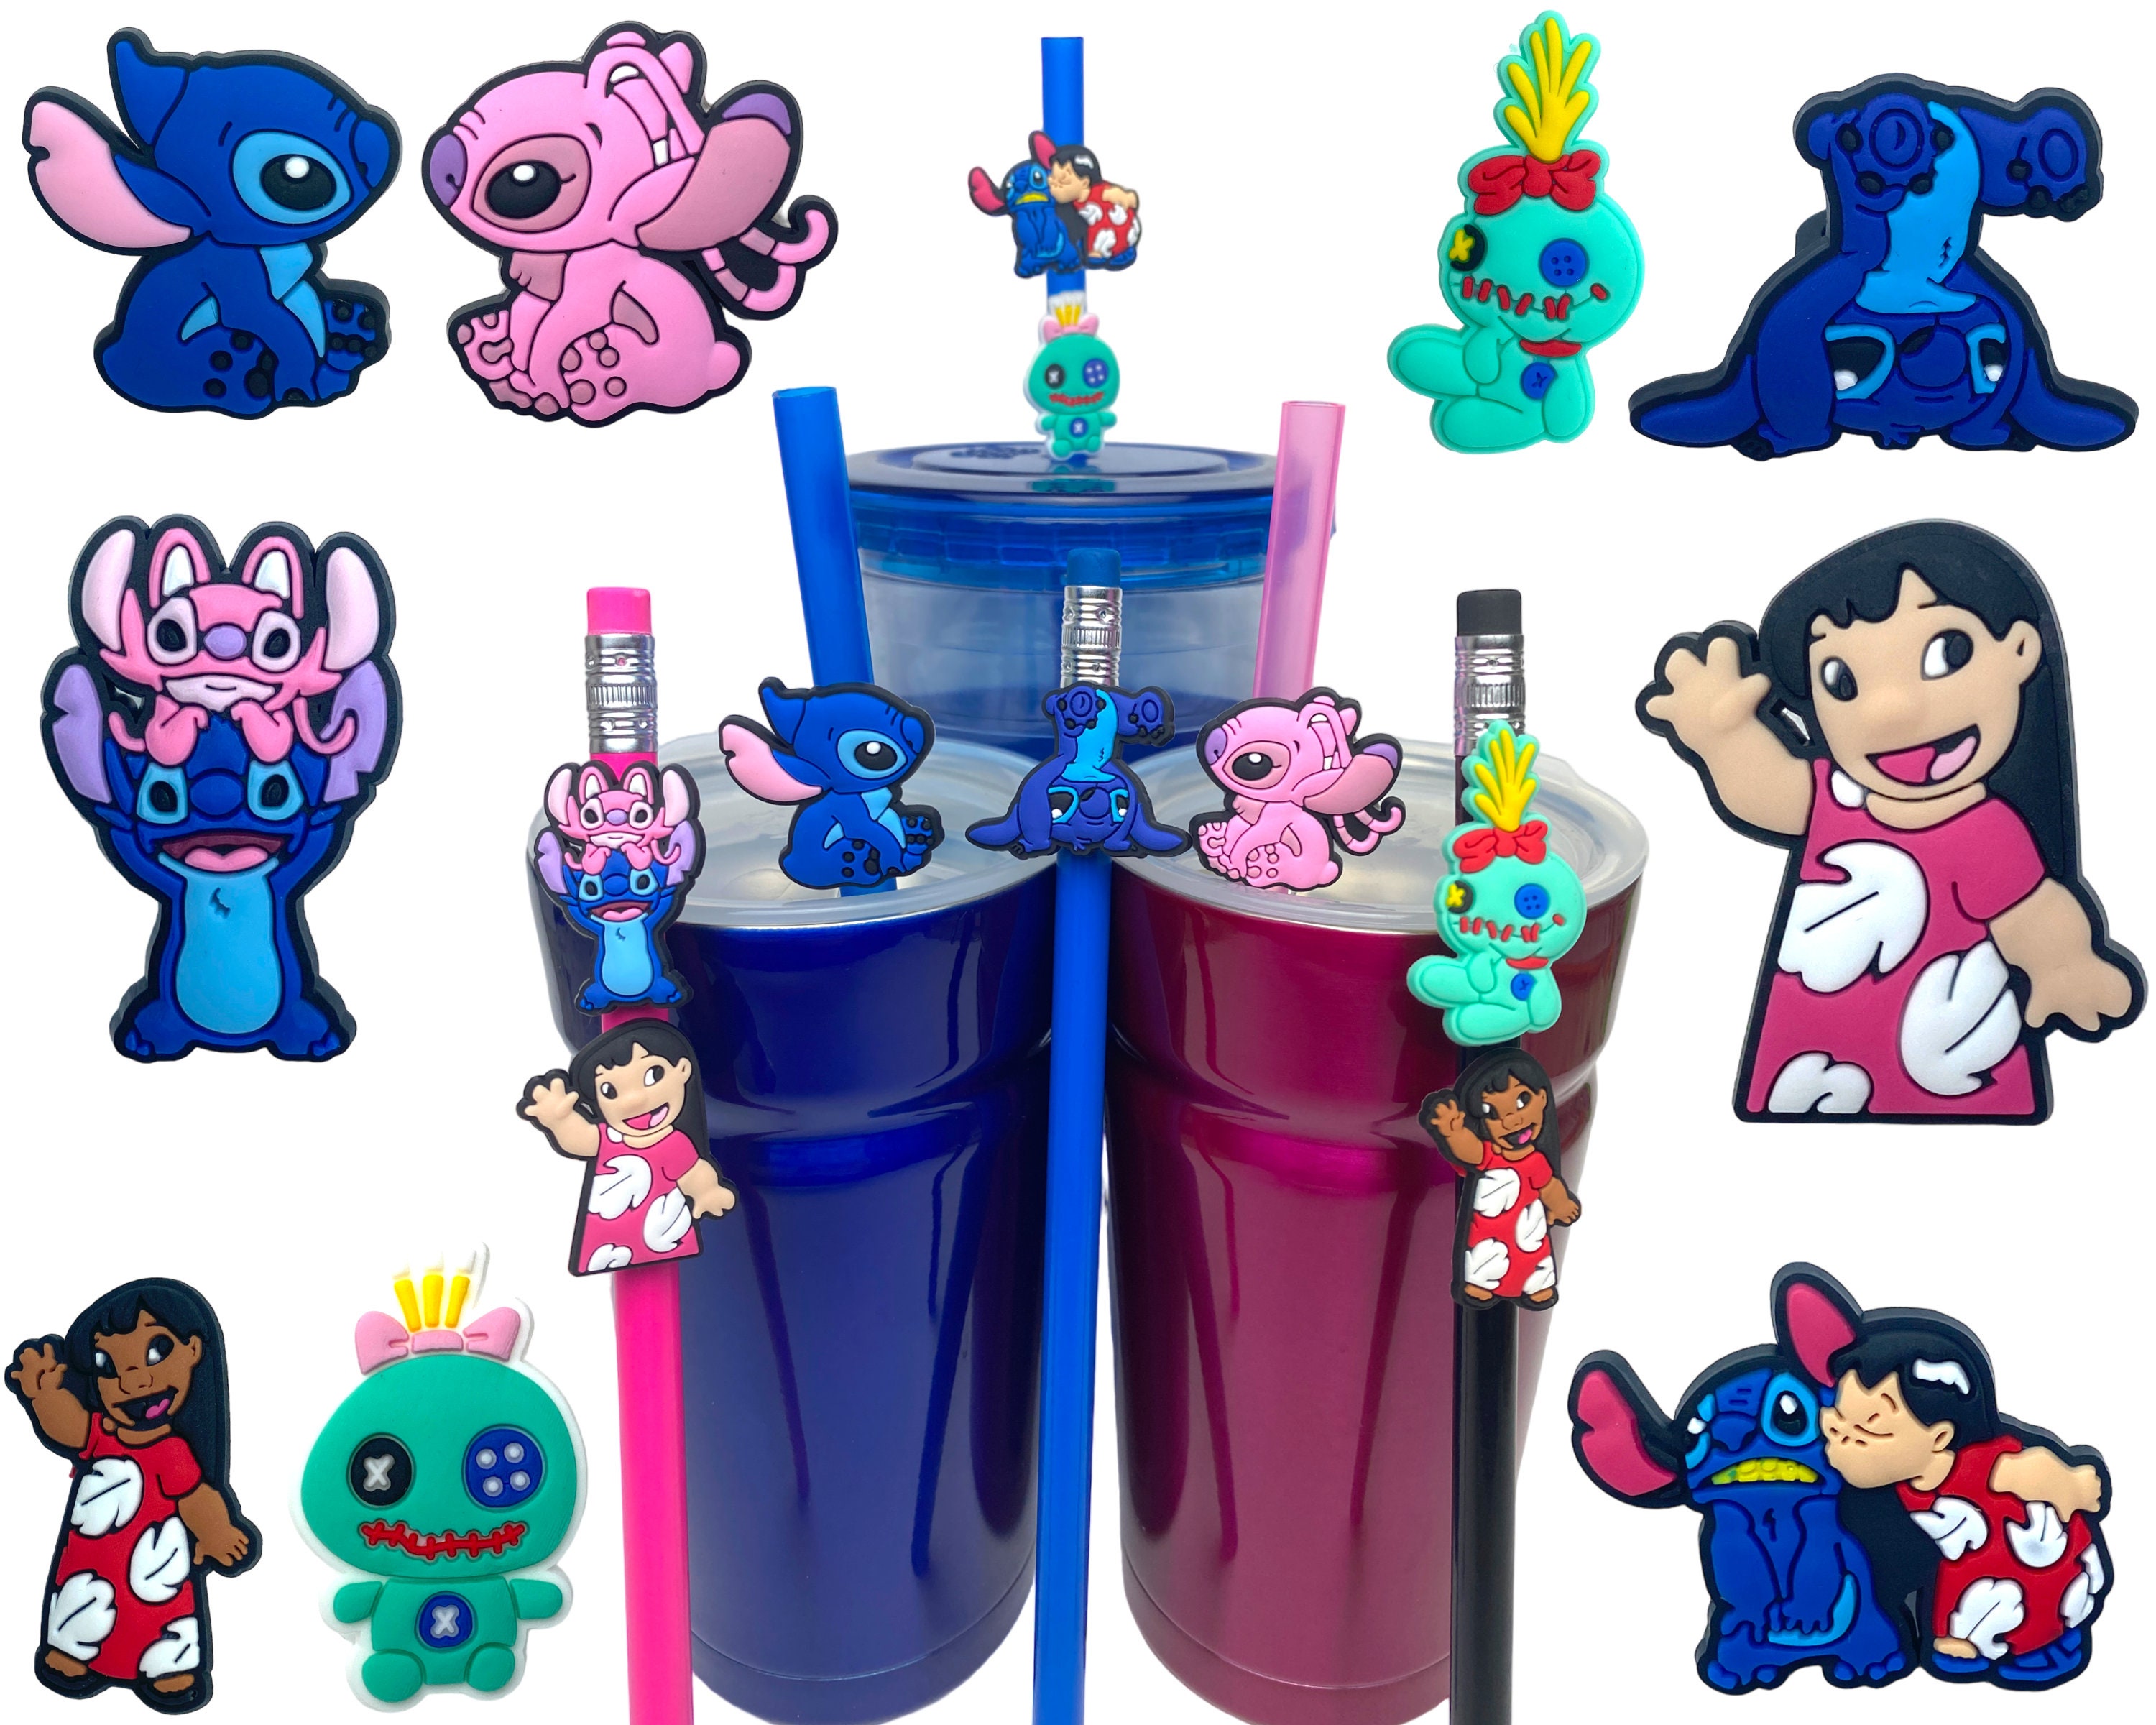 Disney Lilo & Stitch Angel and Stitch Made For Each Other Can Cup